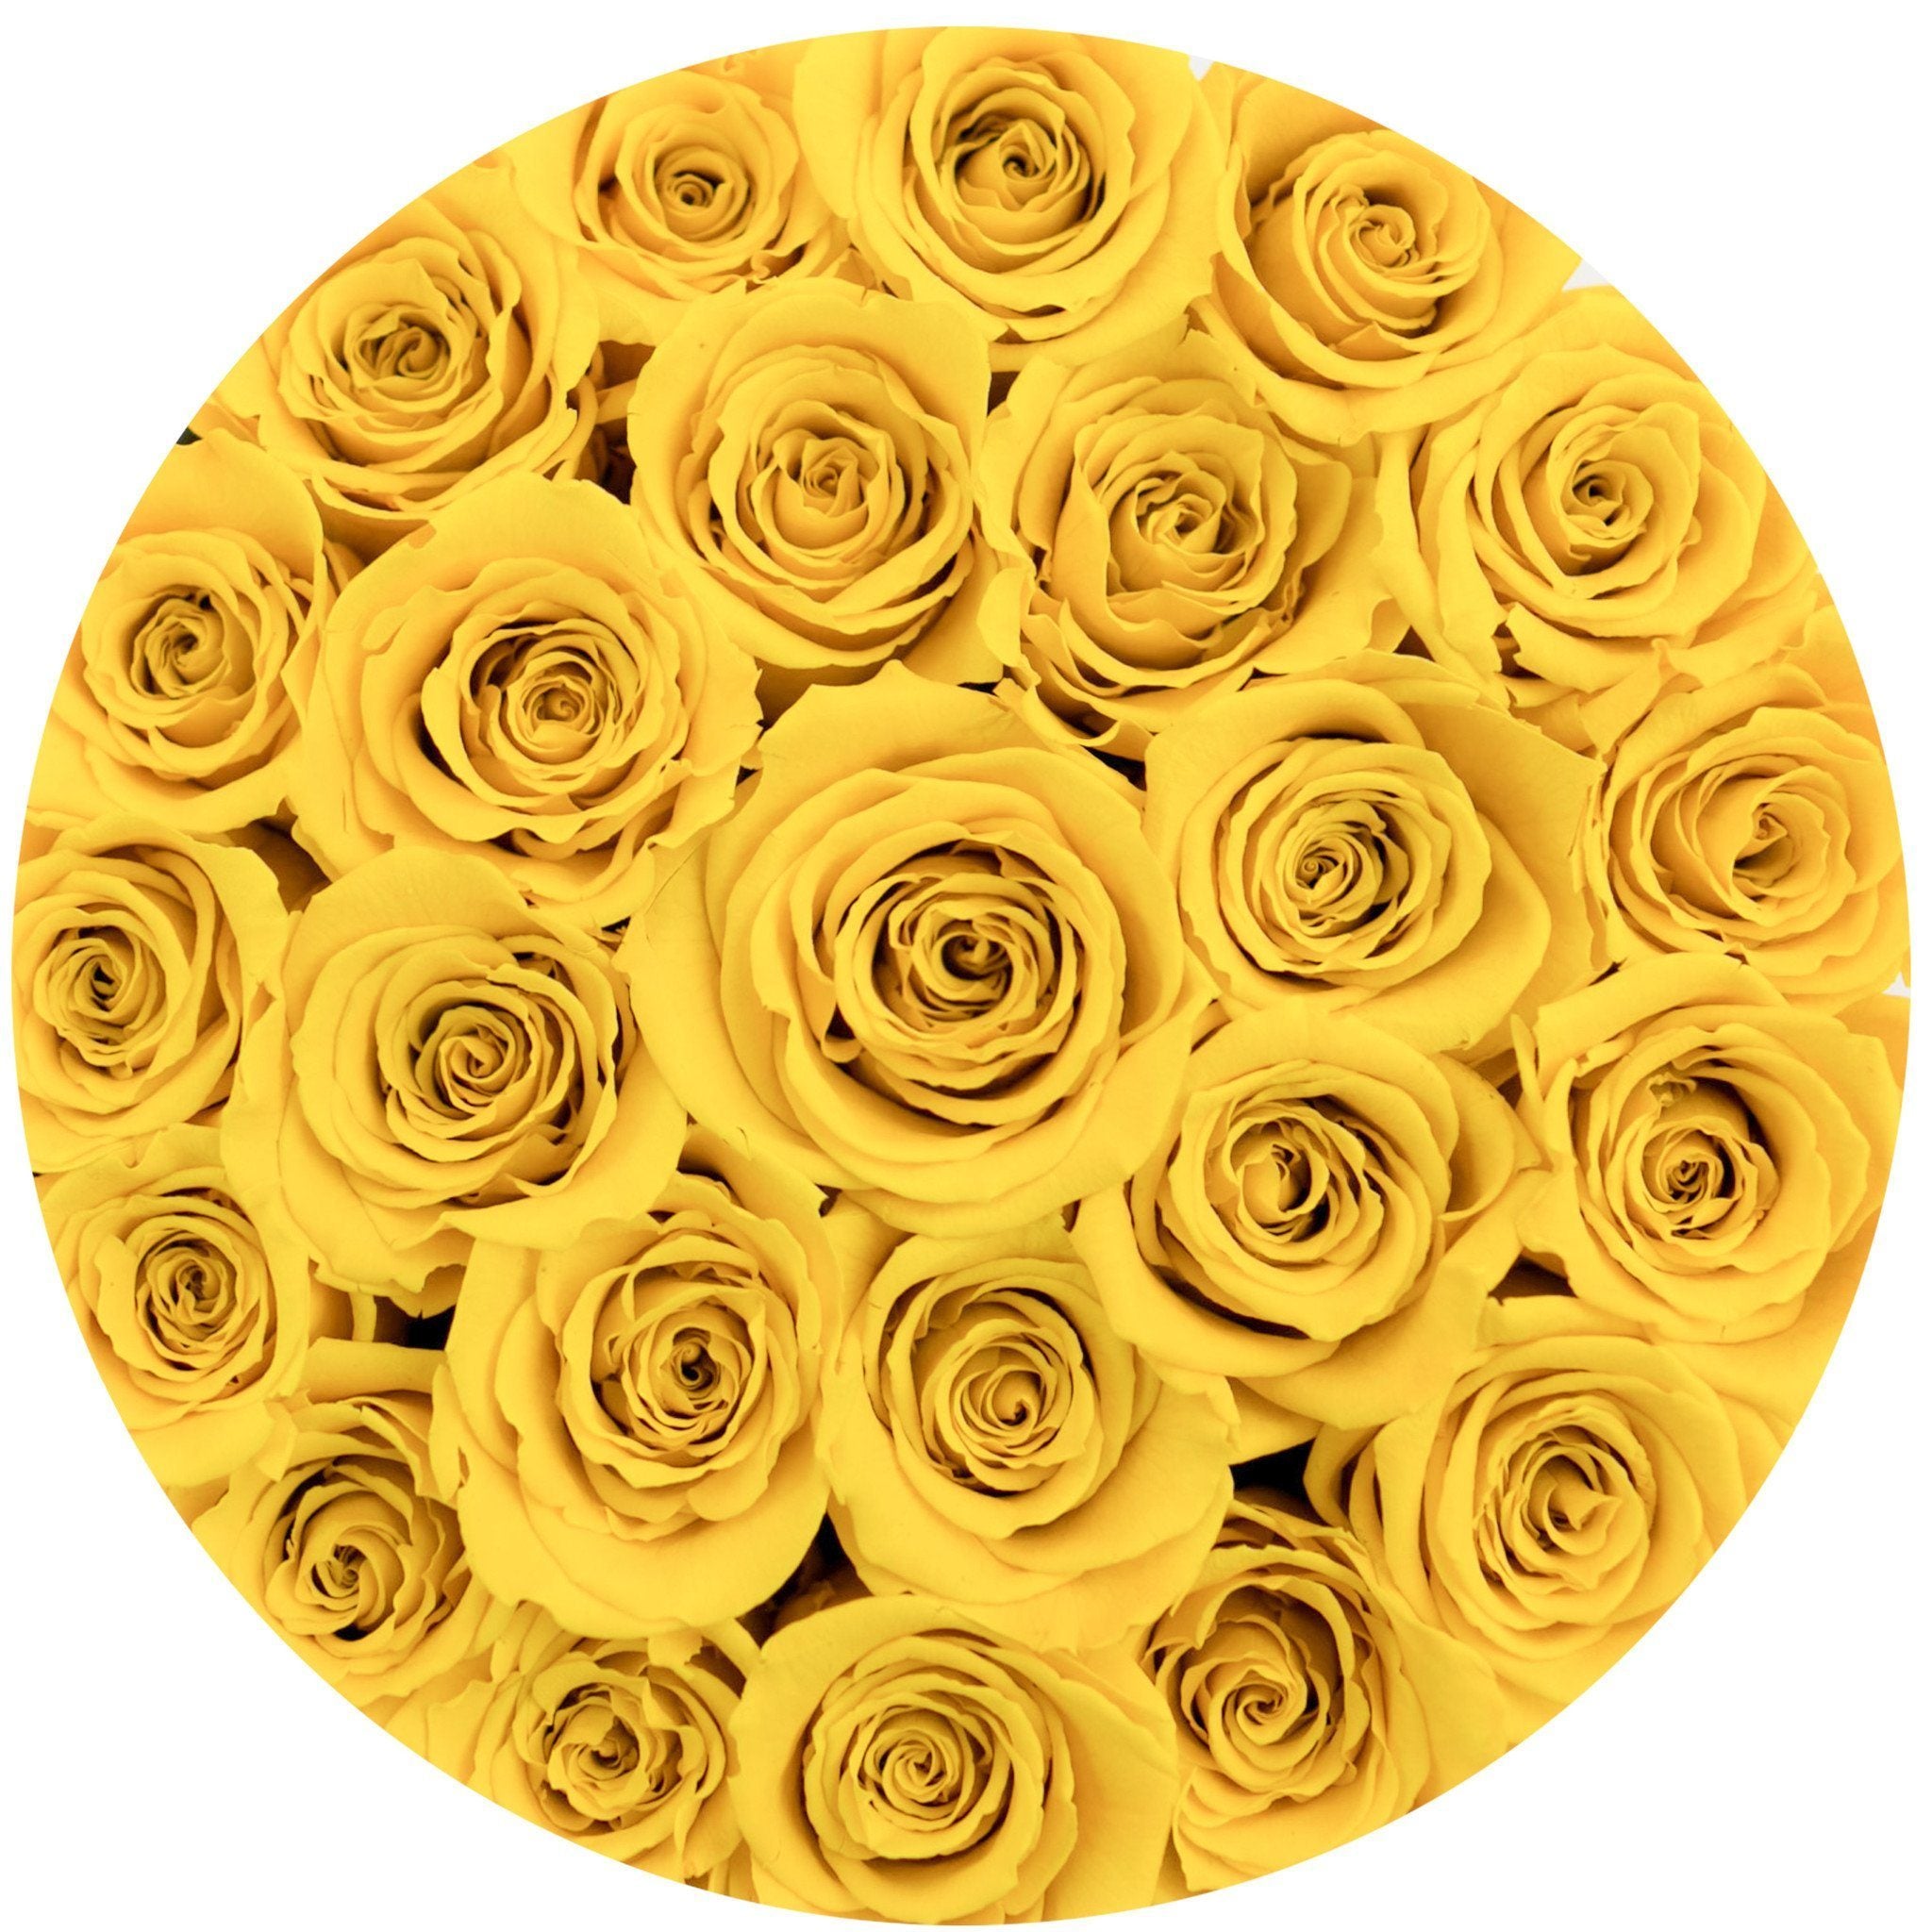 classic round box - black - yellow roses yellow eternity roses - the million roses